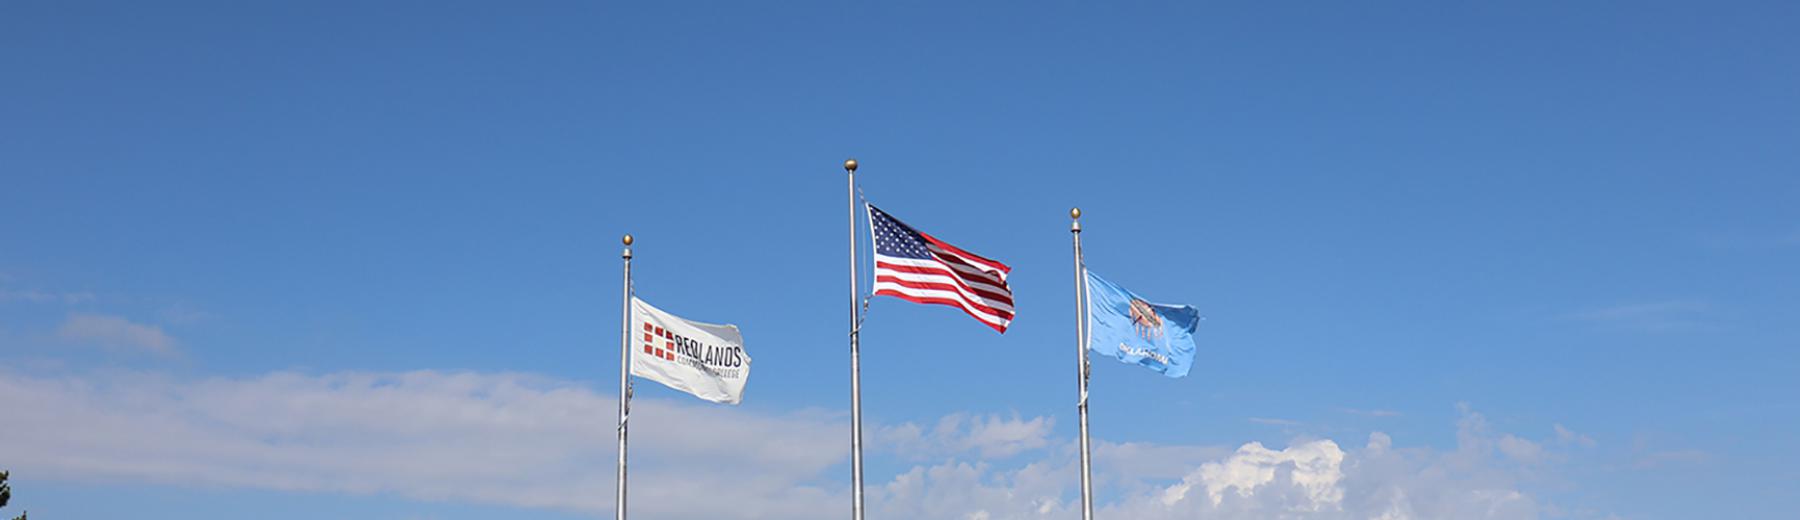 flags flying in front of campus